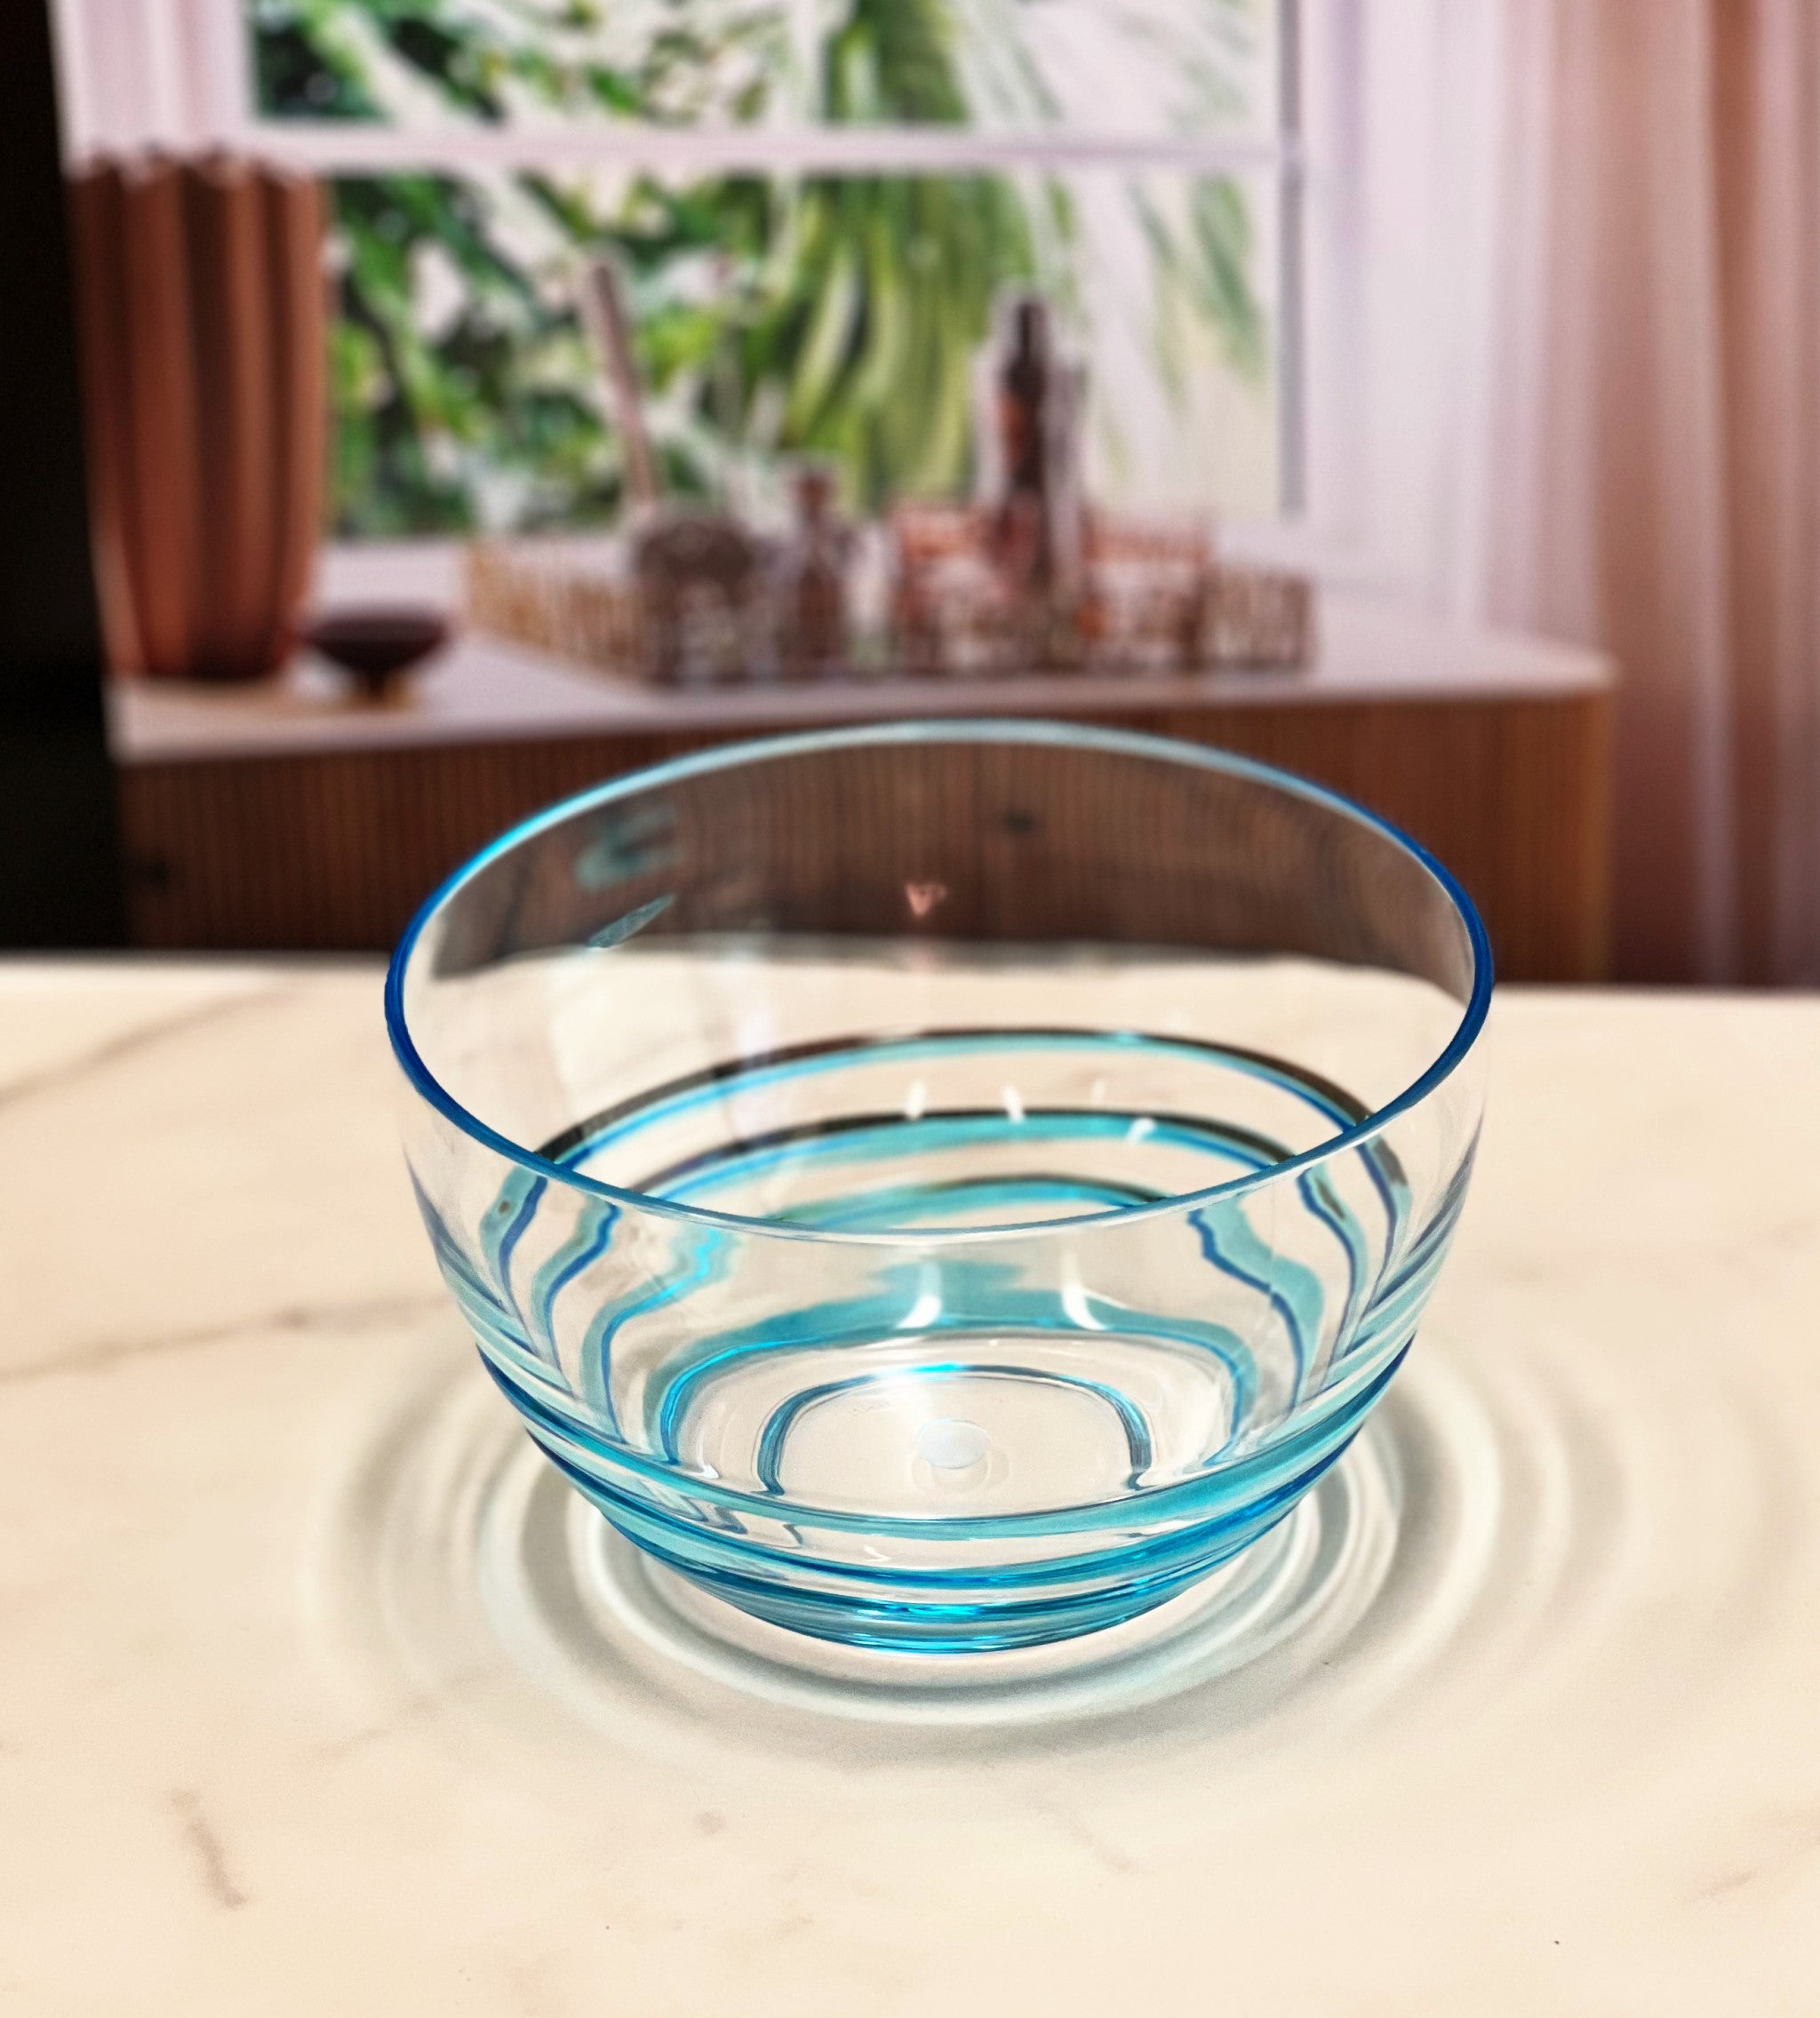 Clear and Blue Four Piece Swirl Acrylic Service For Four Bowl Set